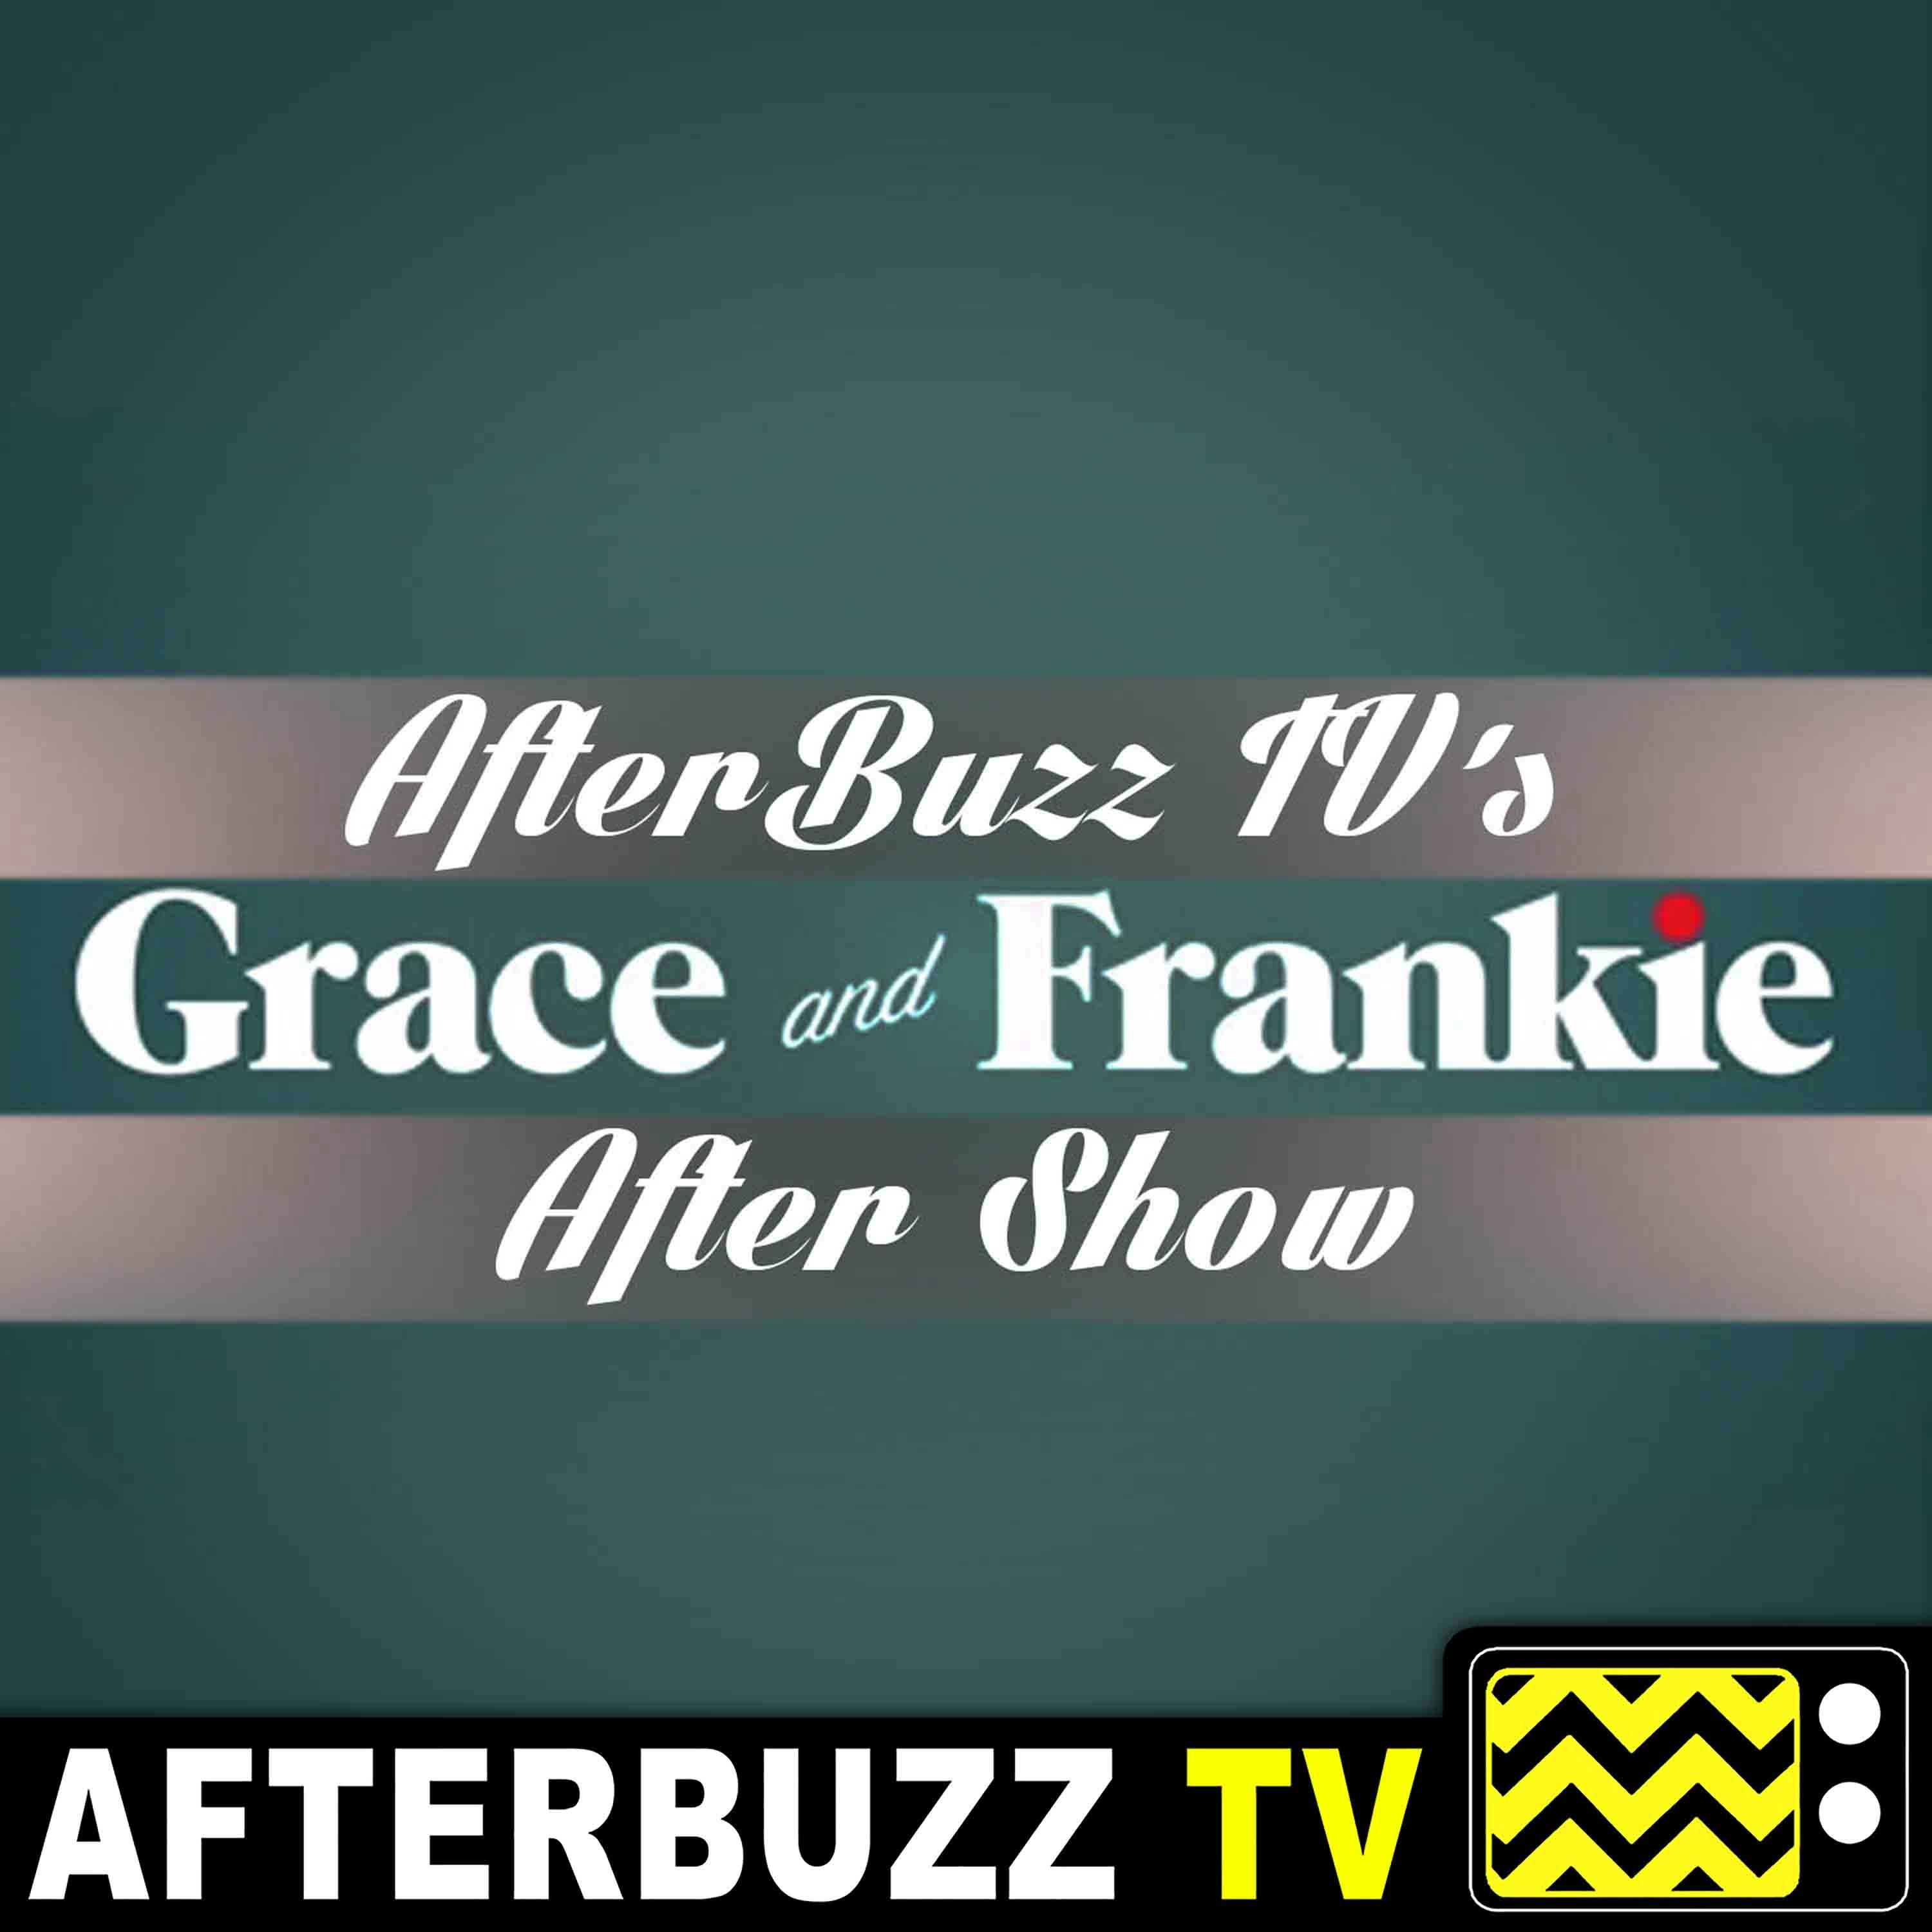 Grace And Frankie S:2 | The Wish; The Vitamix E:1 & E:2 | AfterBuzz TV AfterShow